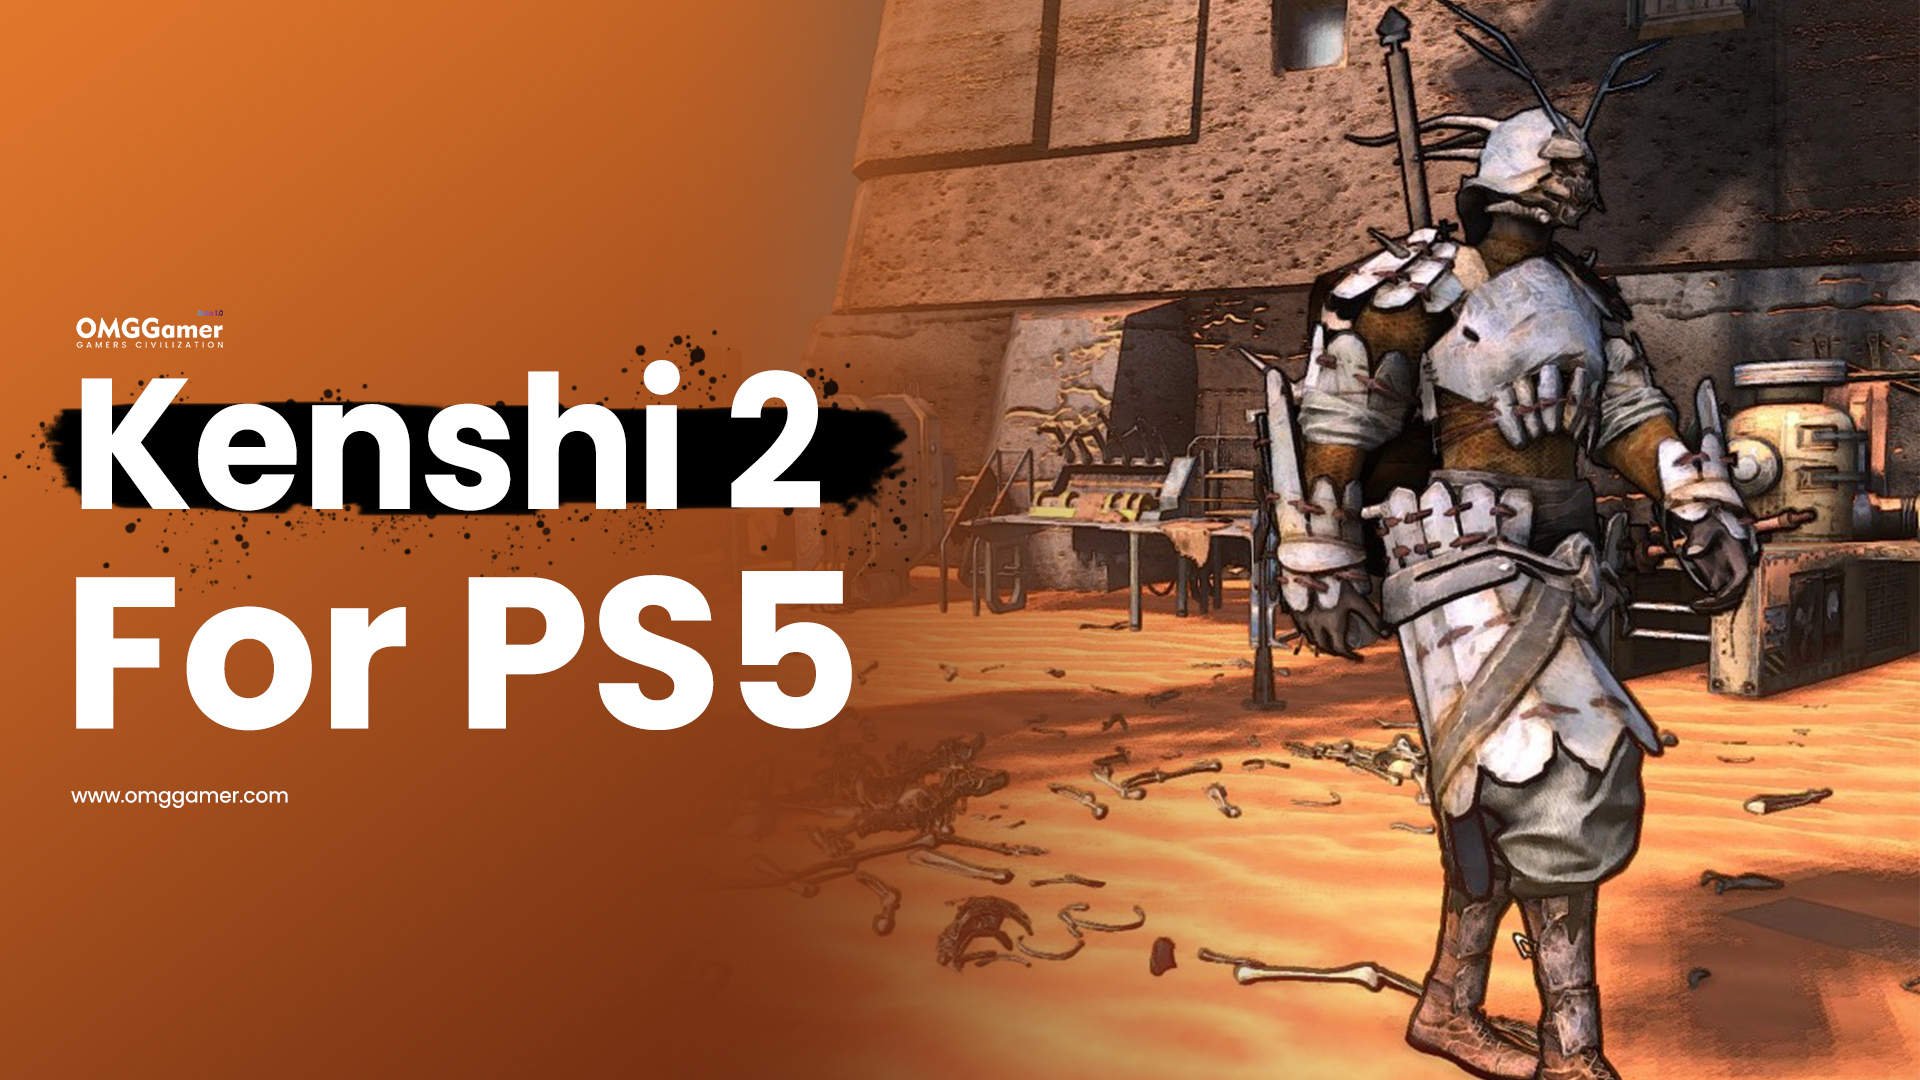 Kenshi 2 for P5